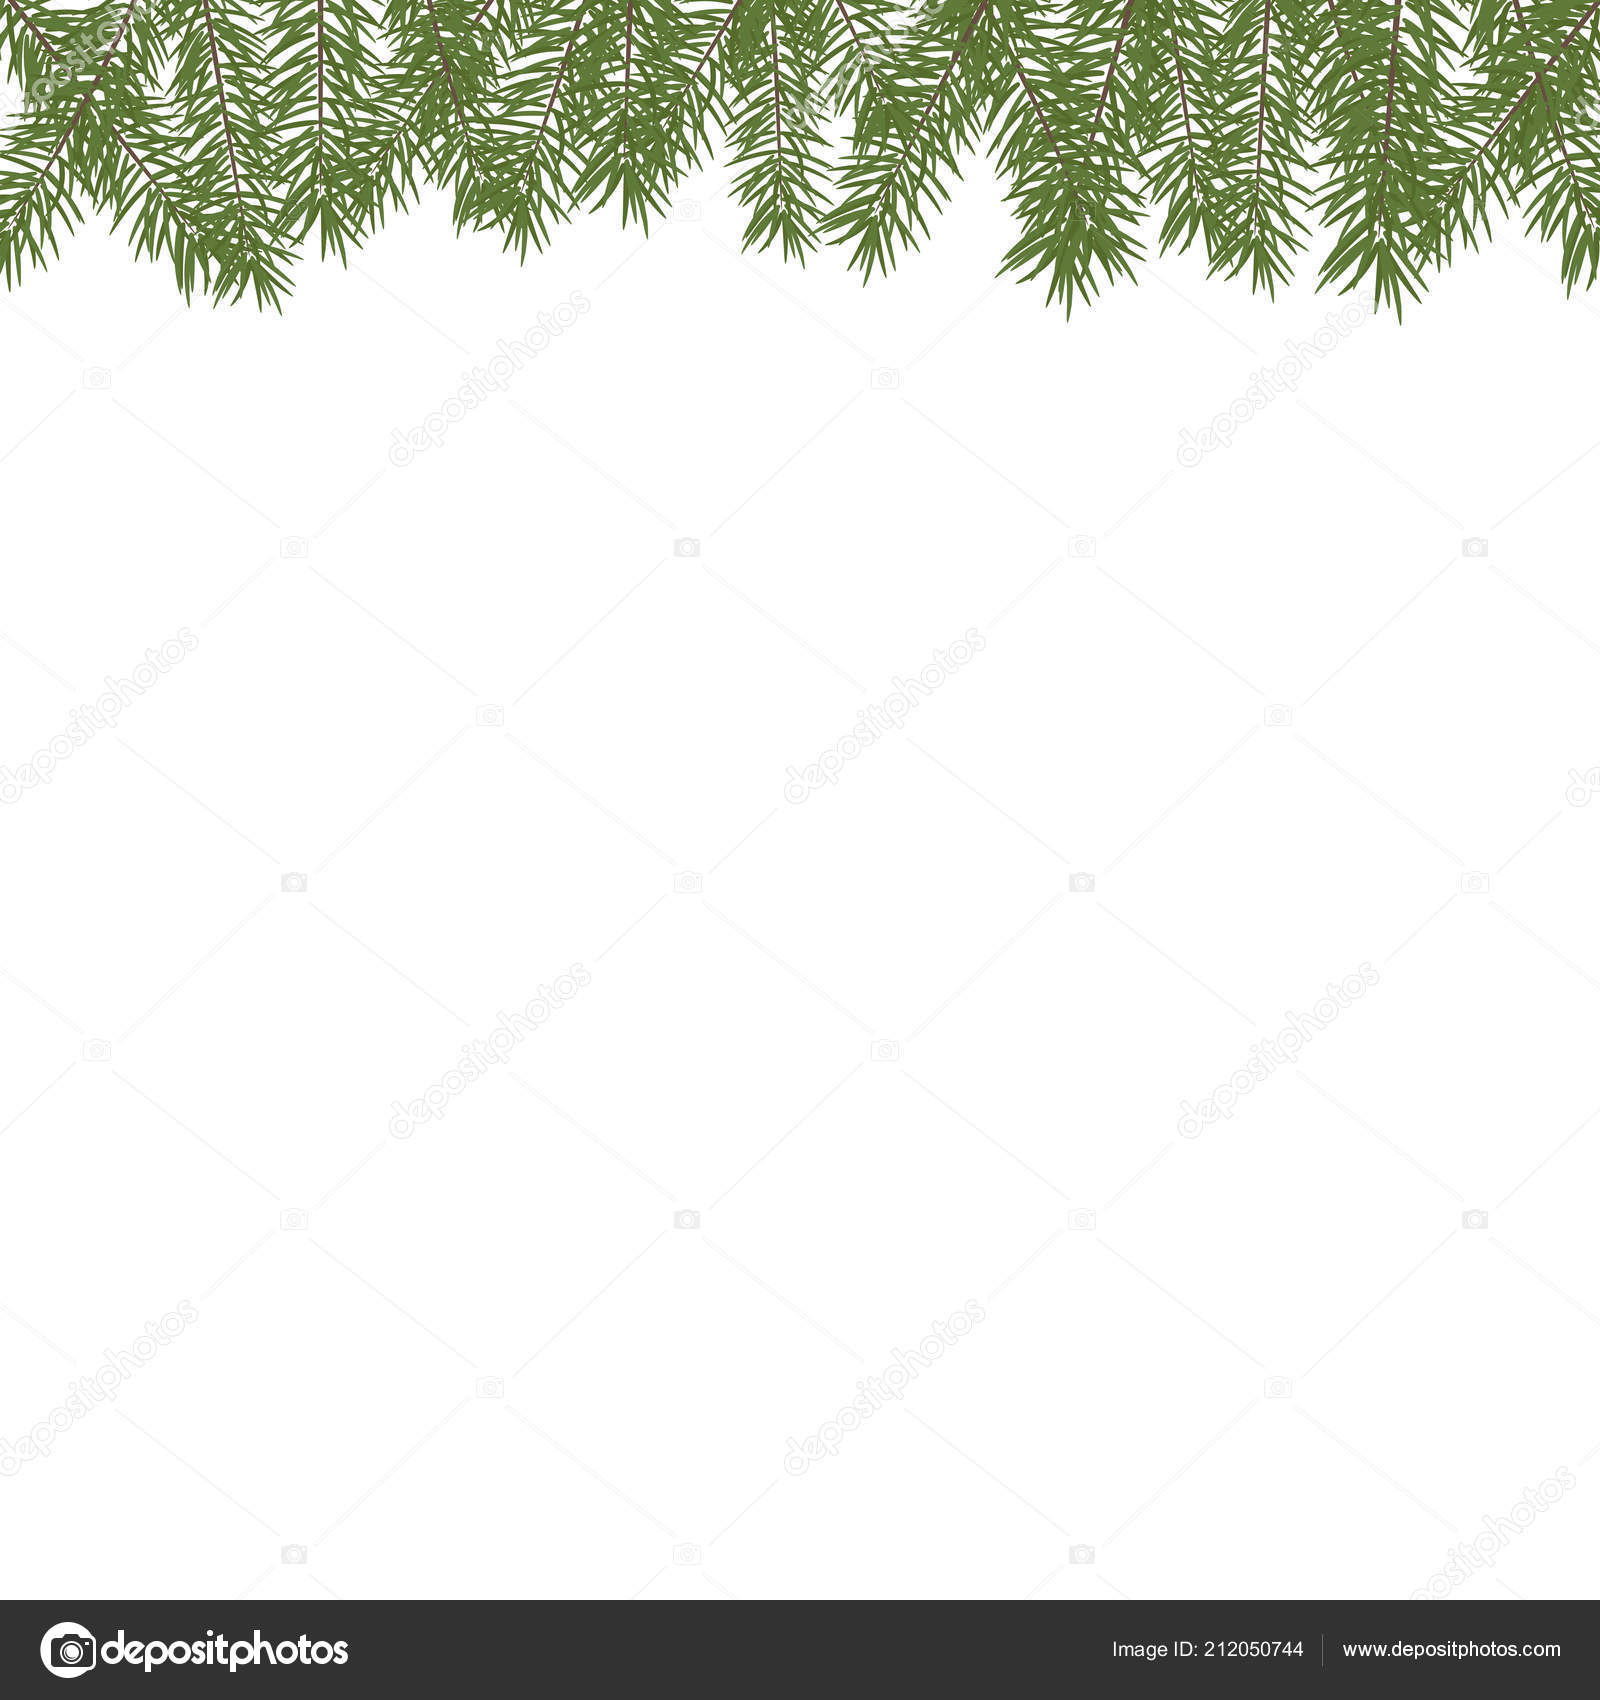 Background with Vector Christmas Tree Branches, Vectors